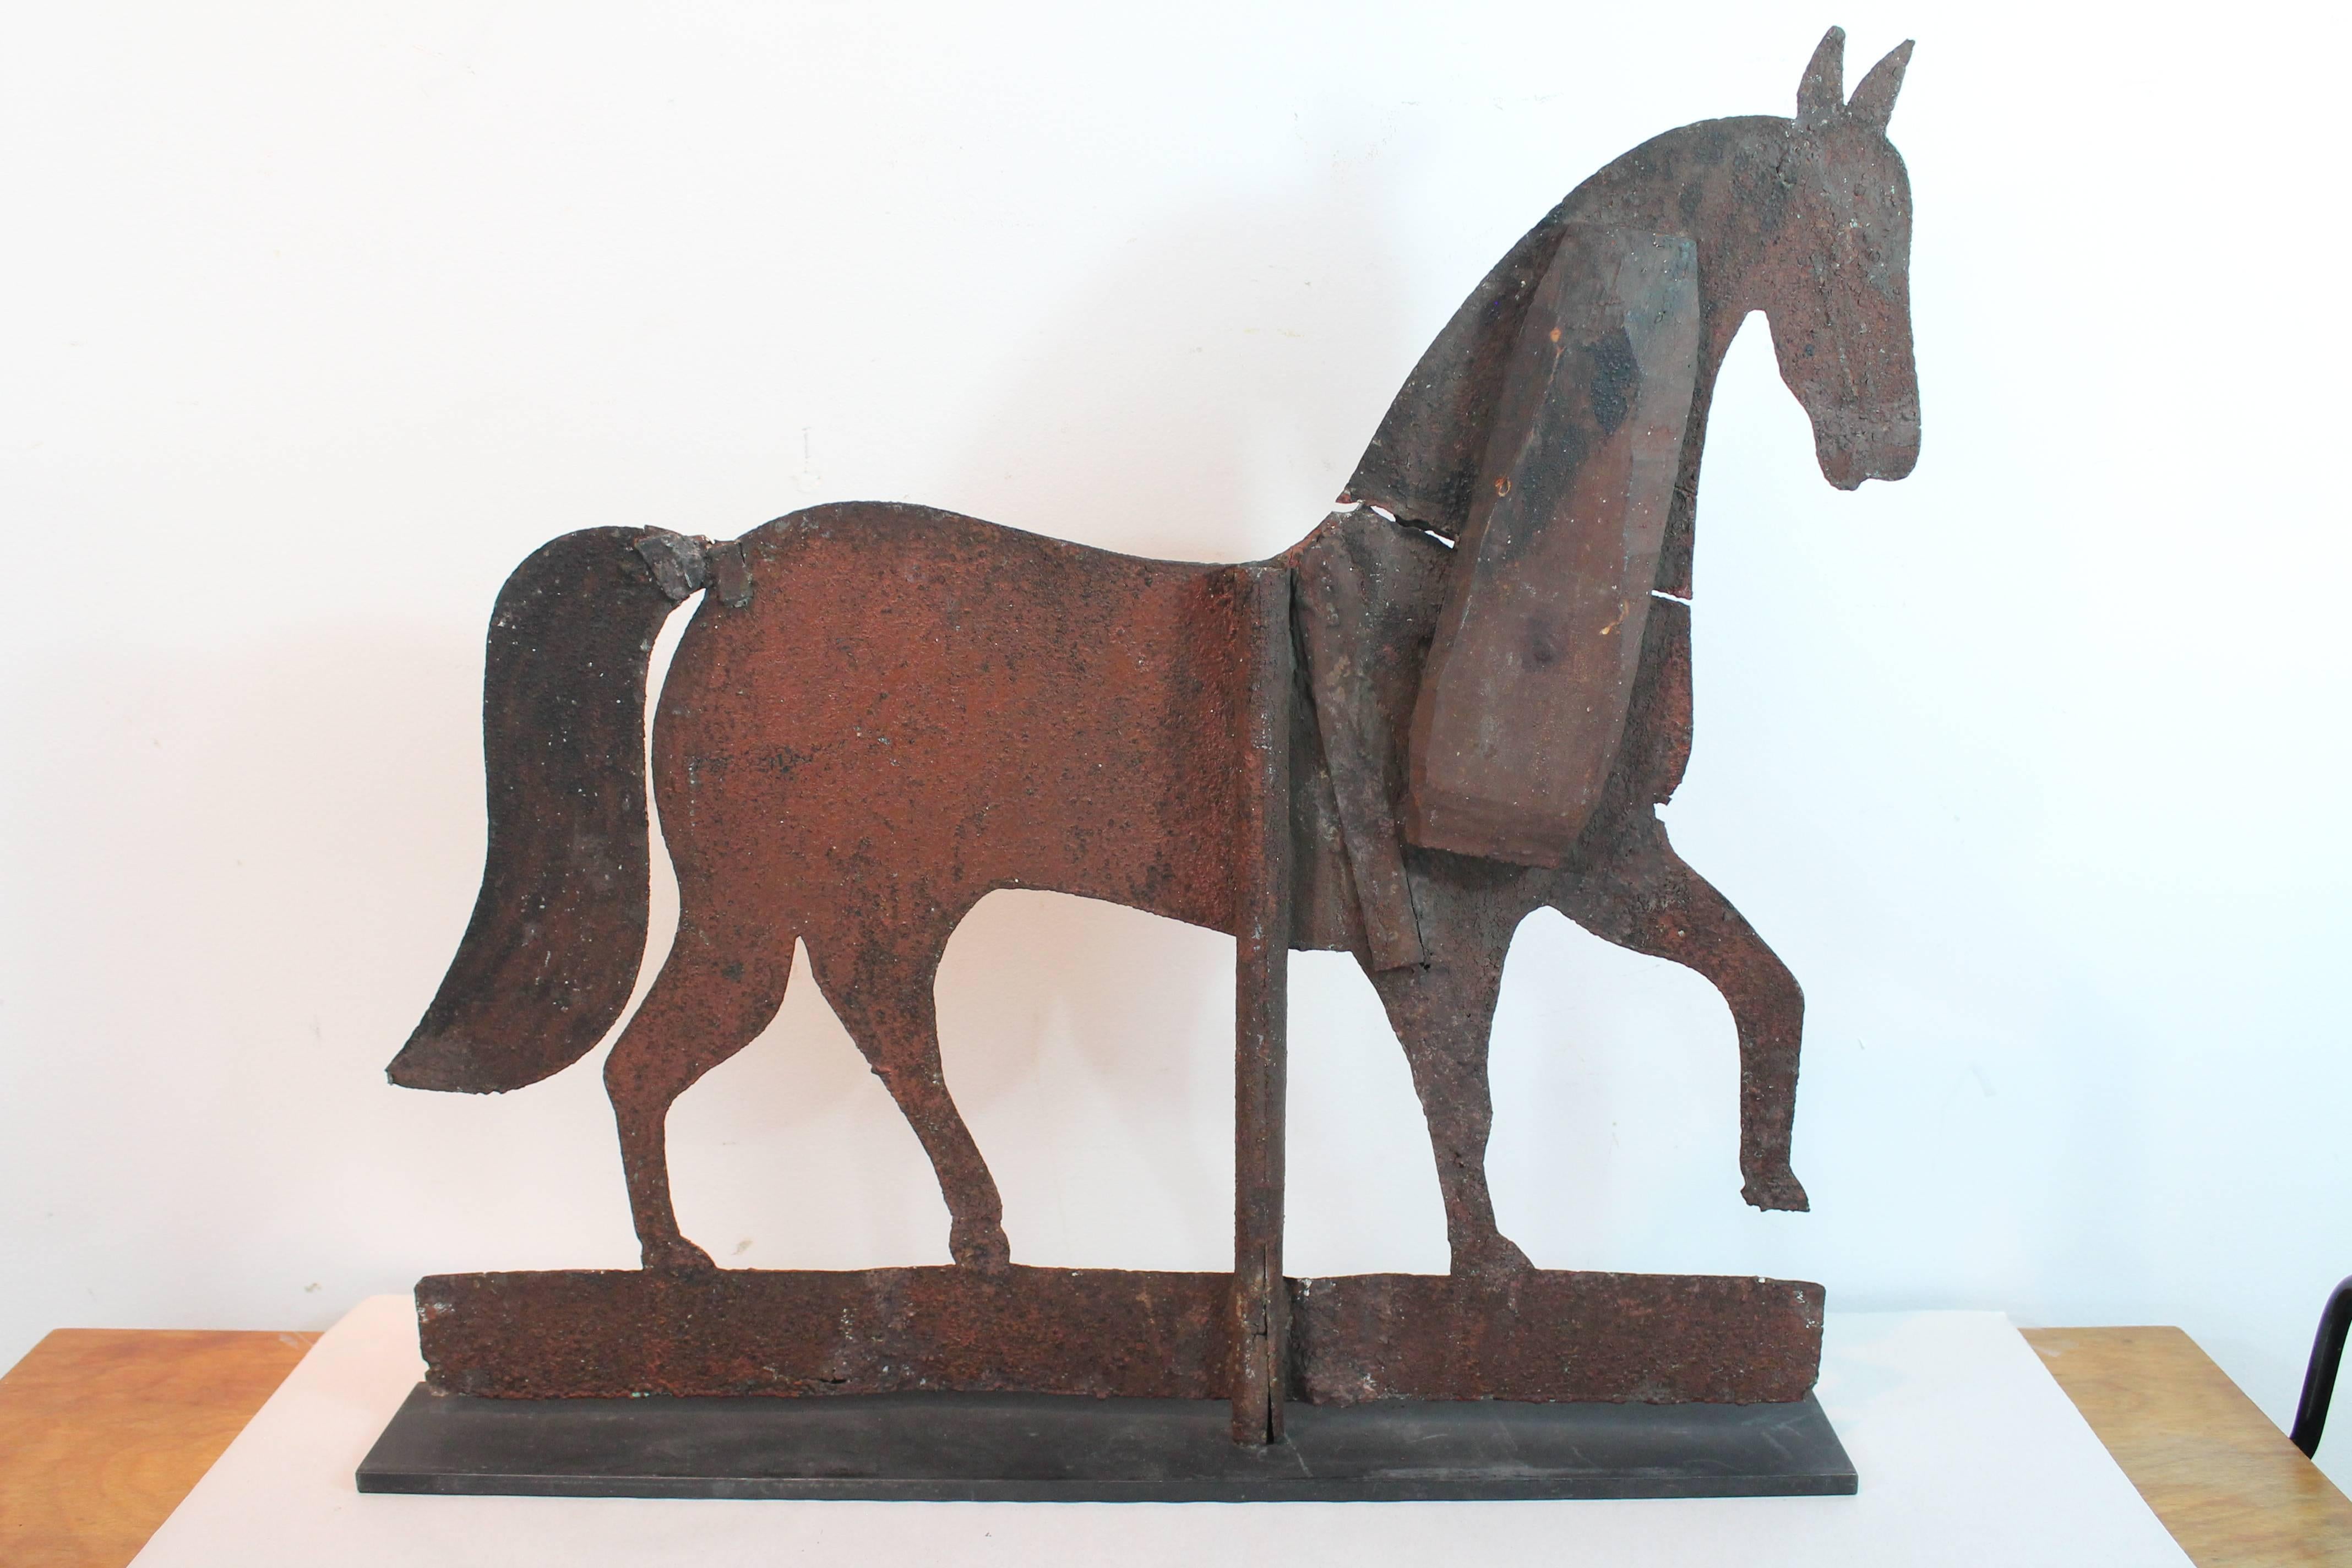 Great graphic Folk Art sheet metal horse Silhouette weathervane with great early wood neck repair that adds dimension and a quirky presence.
From the Harvey and Isobel Kahn collection.
Mounted on contemporary steel stand.